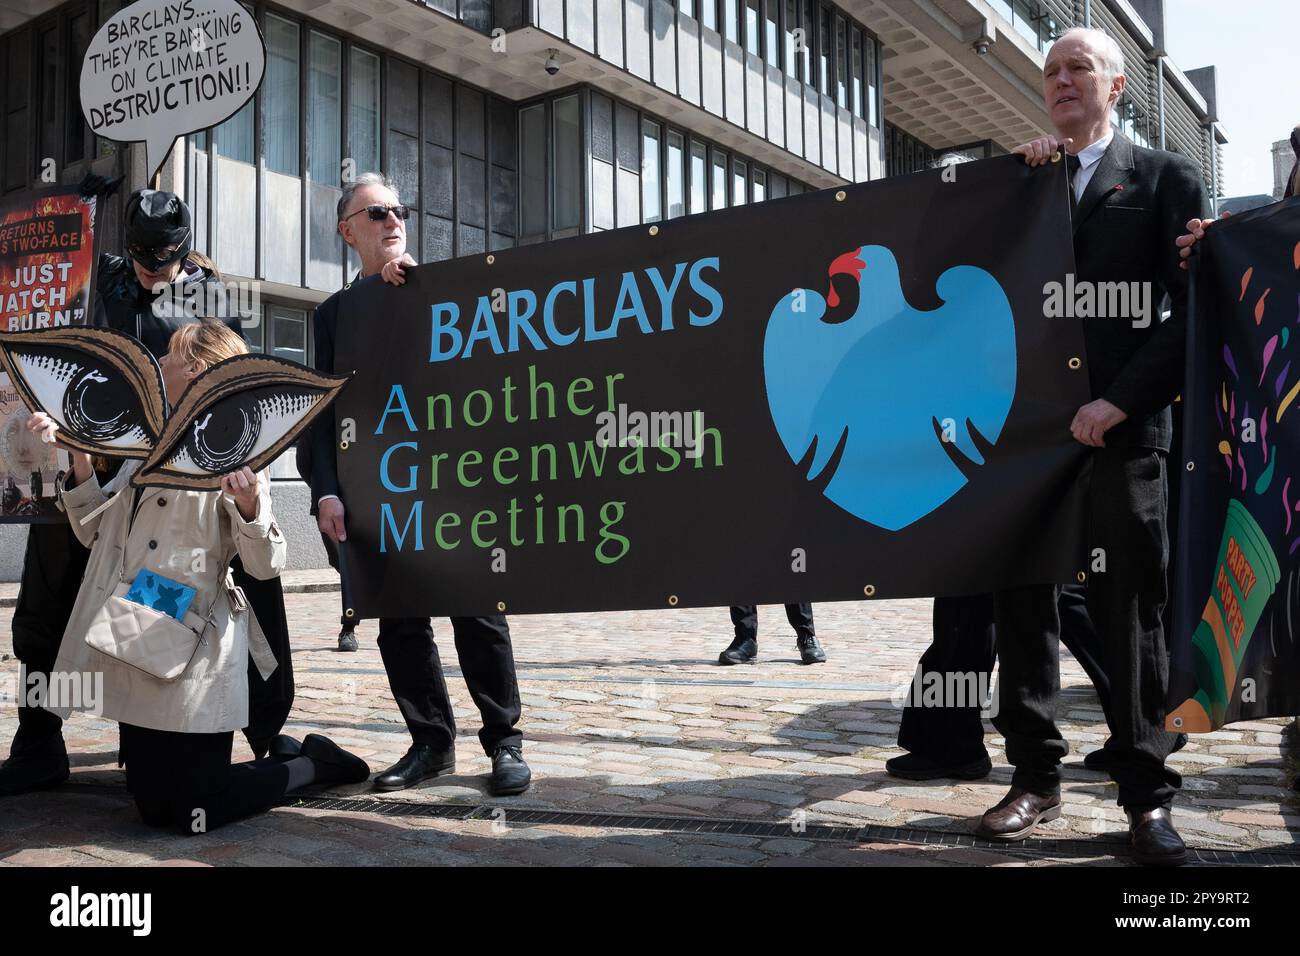 London, UK. 3 May, 2023. Climate activists protest outside the Barclays Bank AGM at the QEII centre in Westminster, calling on the bank to stop financing extraction of the fossil fuels responsible for global heating. The bank is one of the largest such lenders in Europe, while scientists warn we cannot expand oil and gas extraction if we are to meet Paris climate targets on CO2 reduction and temperature increases. Credit: Ron Fassbender/Alamy Live News Stock Photo